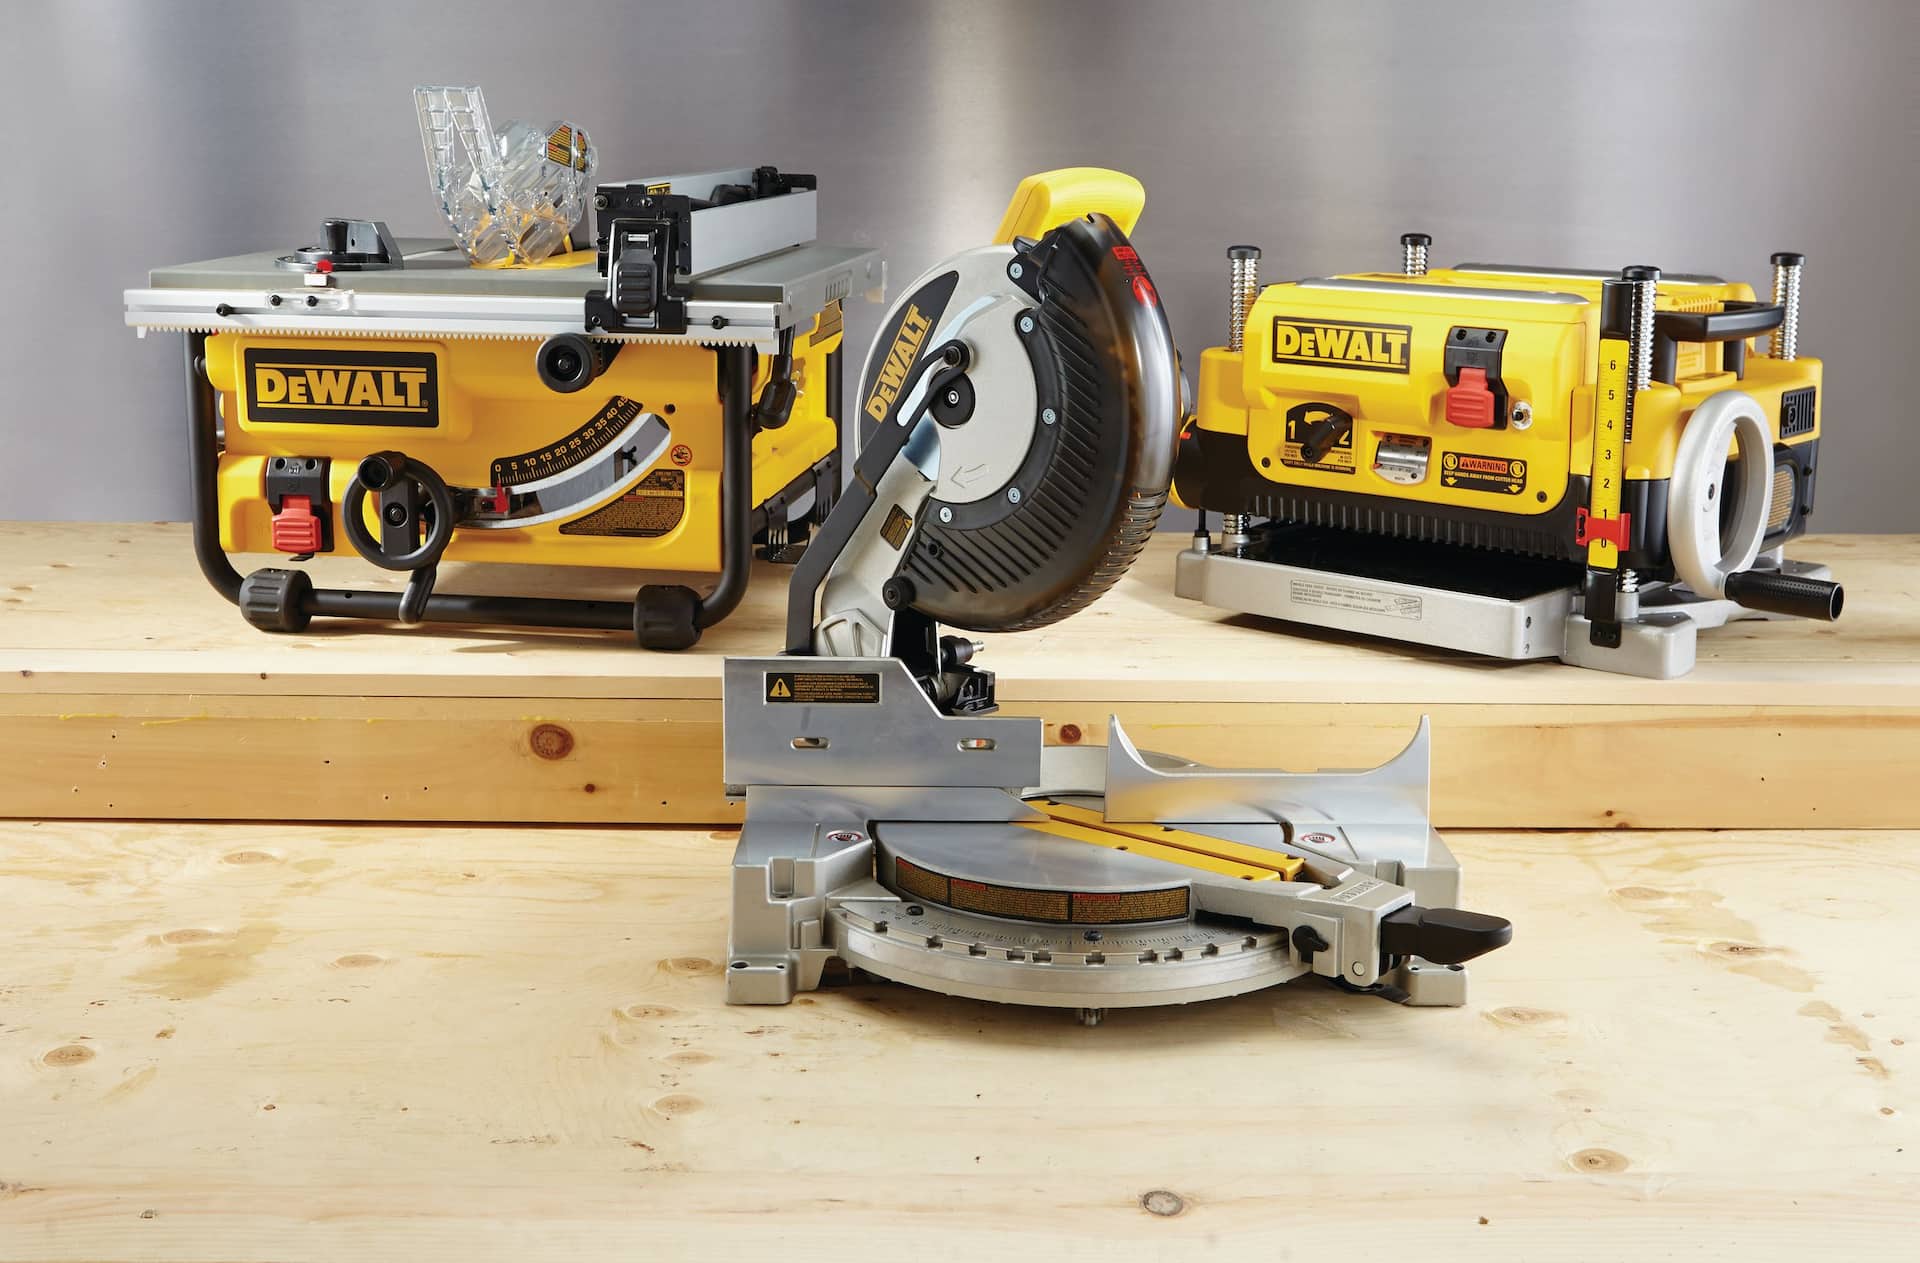 DEWALT DW735 15 Amp Aluminum 13-in Three Knife, Two Speed Thickness Planer  Canadian Tire